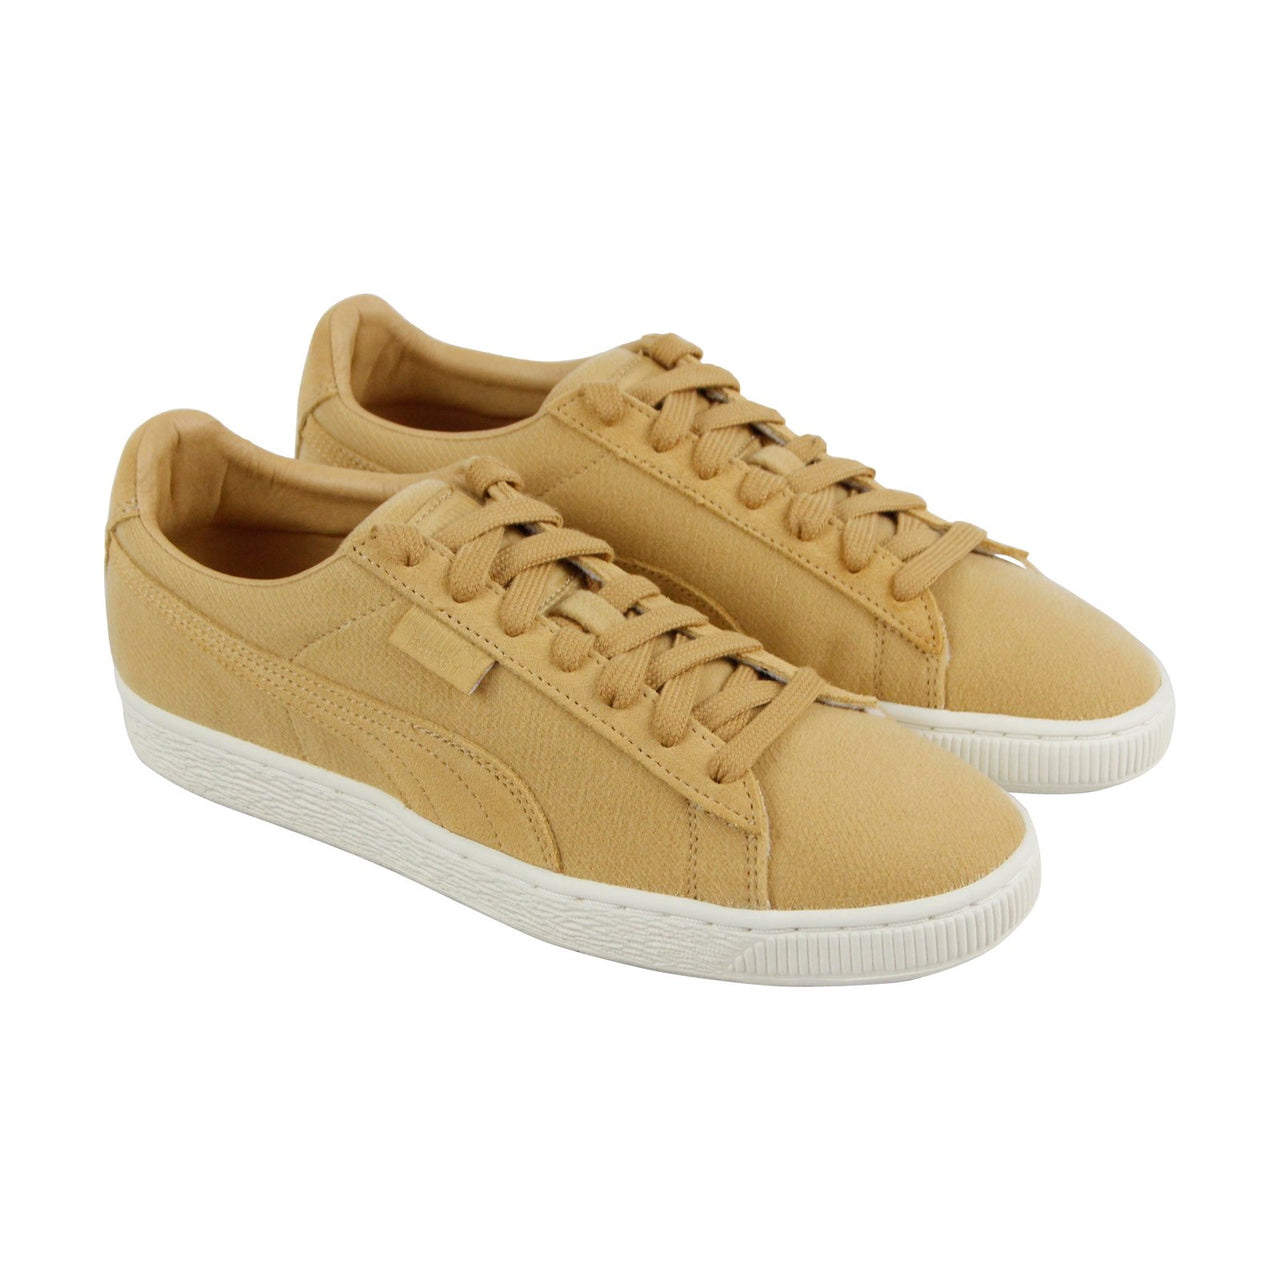 Puma Basket Classic Cocoon 36698403 Mens Tan Brown Lifestyle Sneakers ...